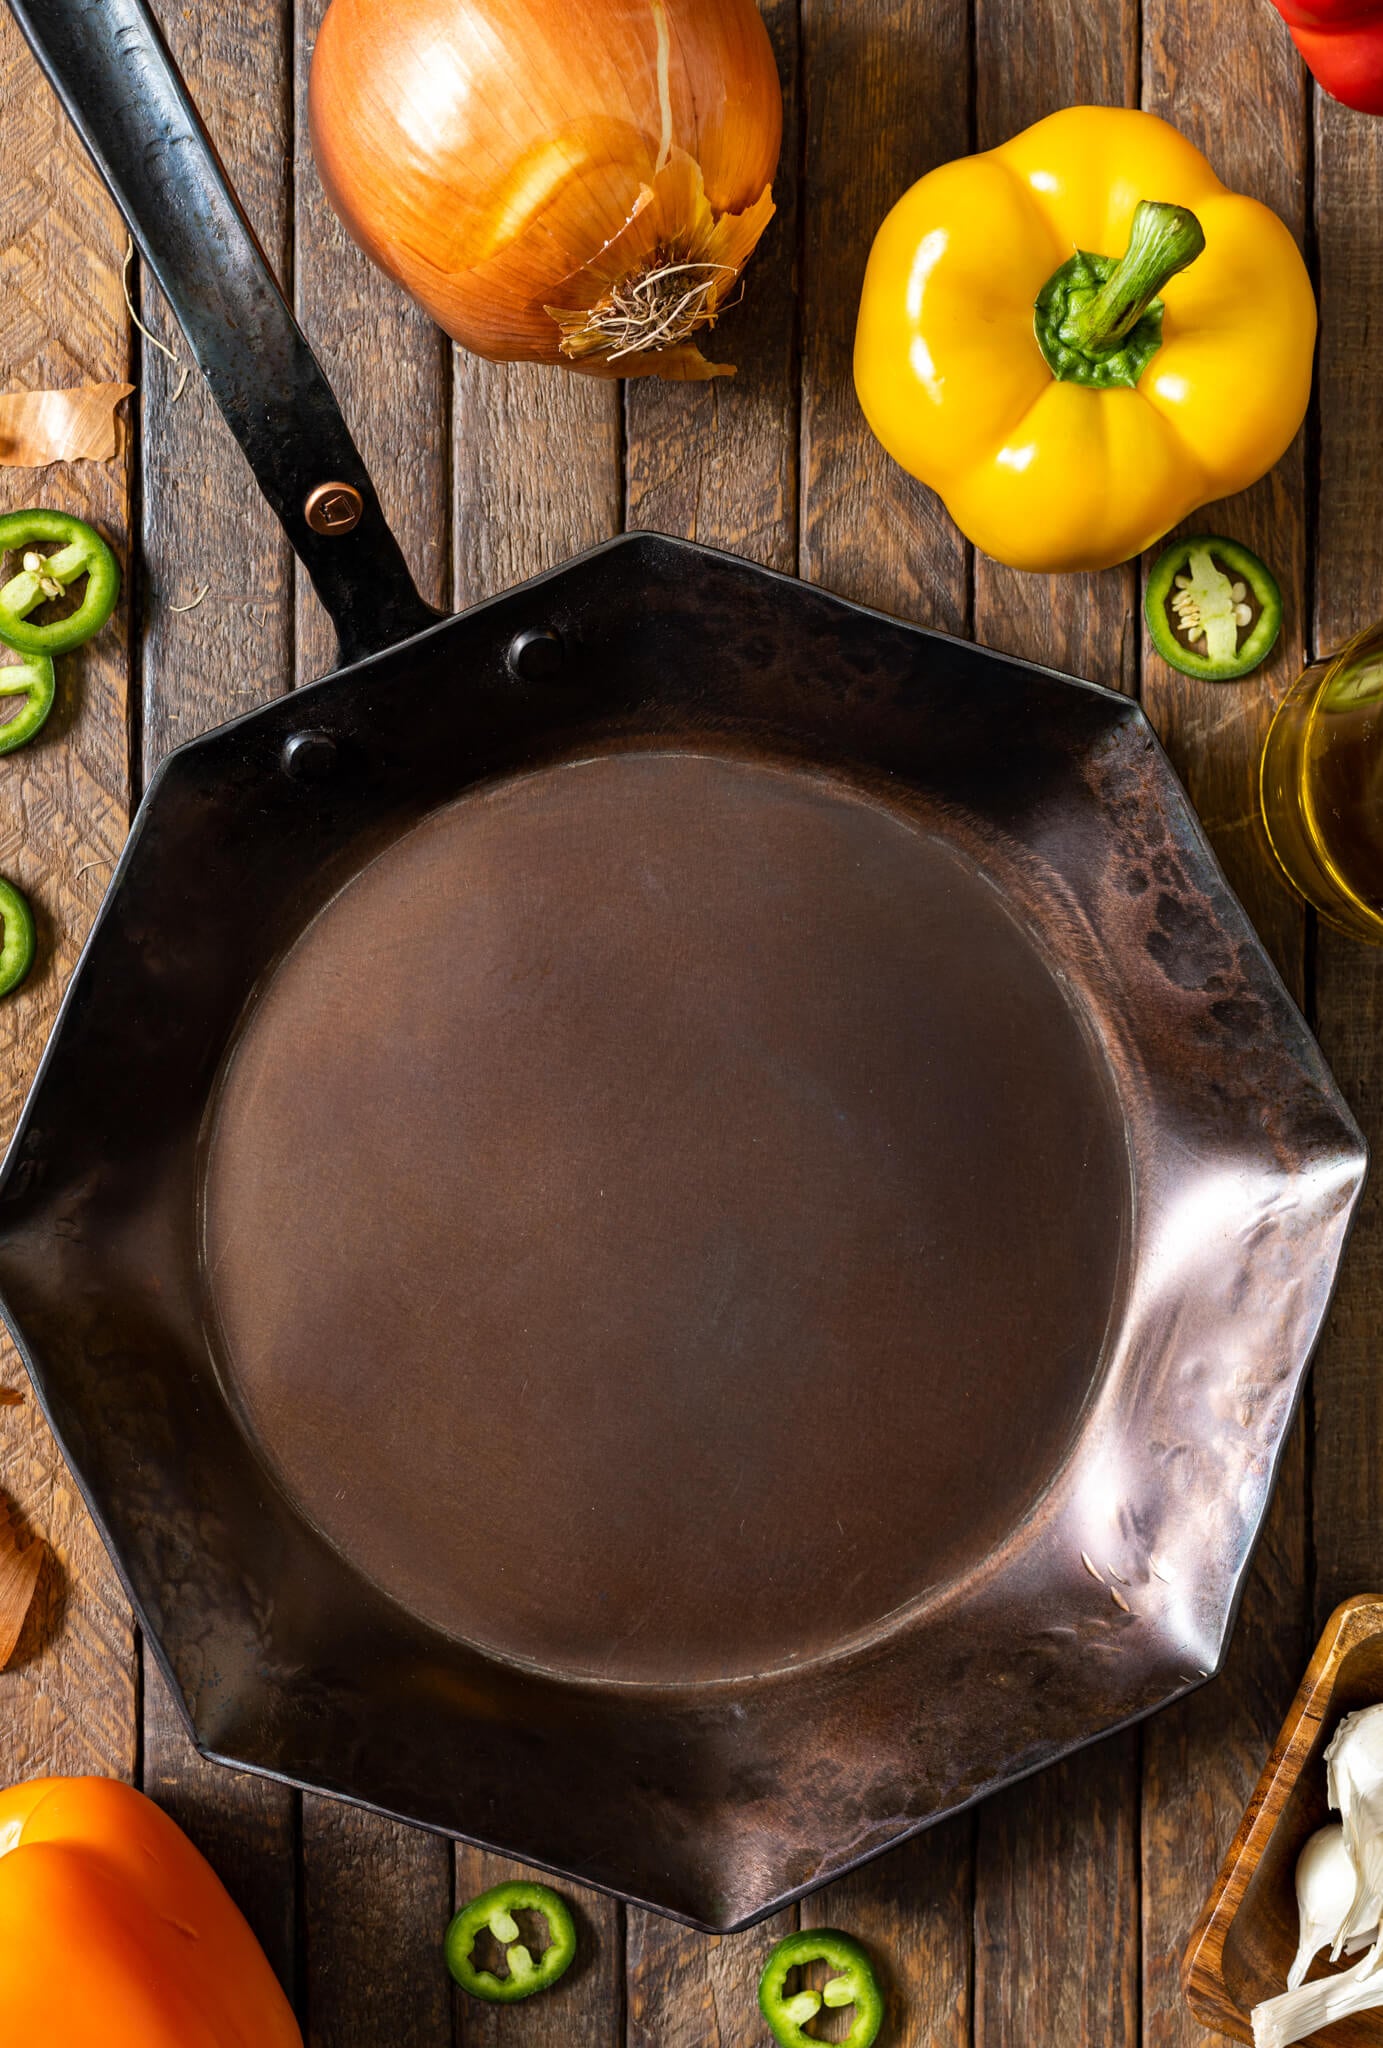 The Best 10-Inch Carbon-Steel Skillet